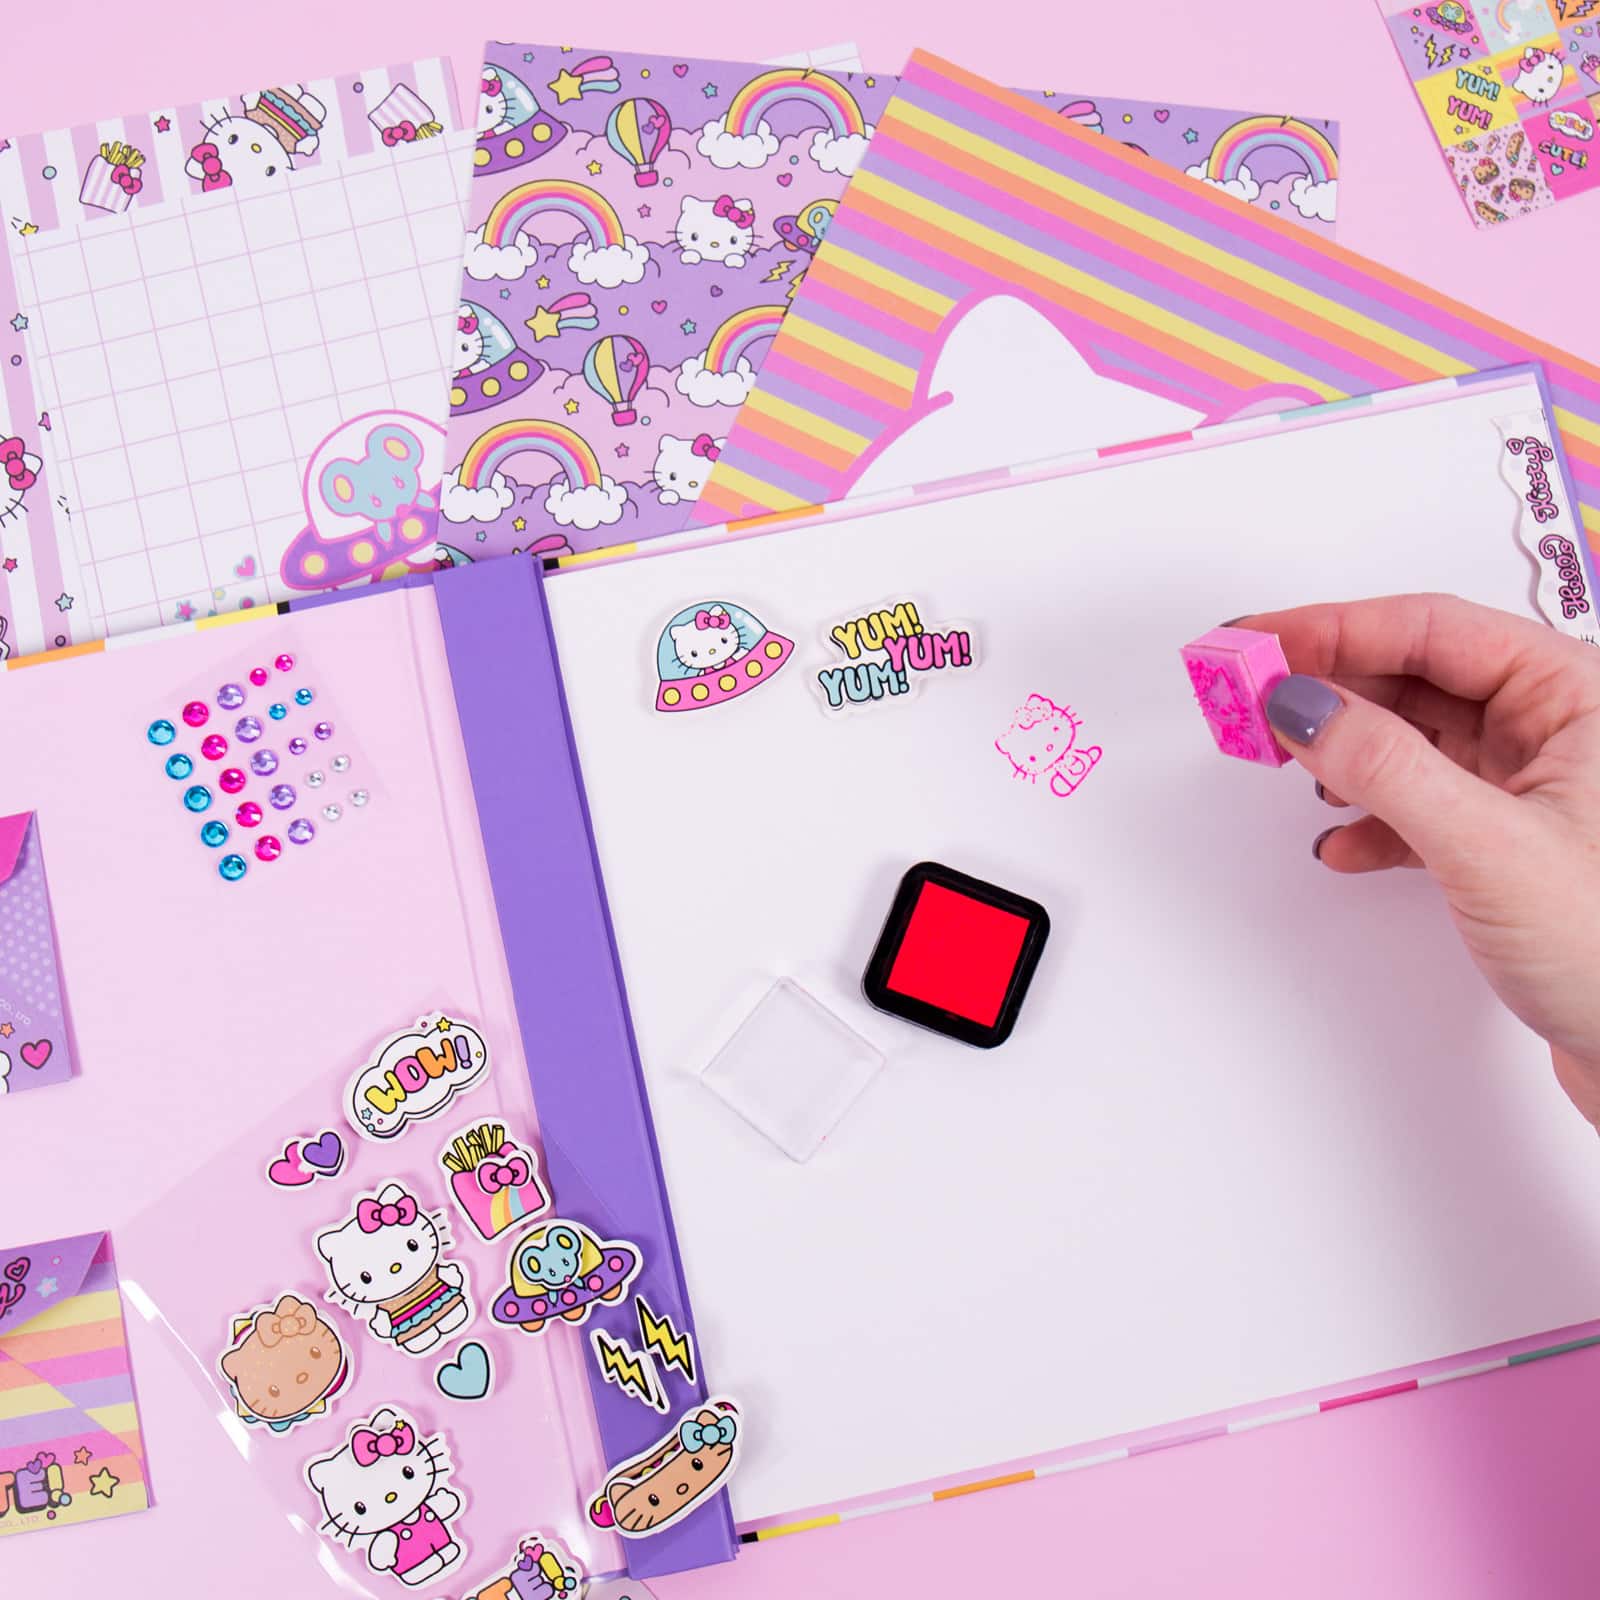 Hello Kitty&#xAE; All-in-One Scrapbook